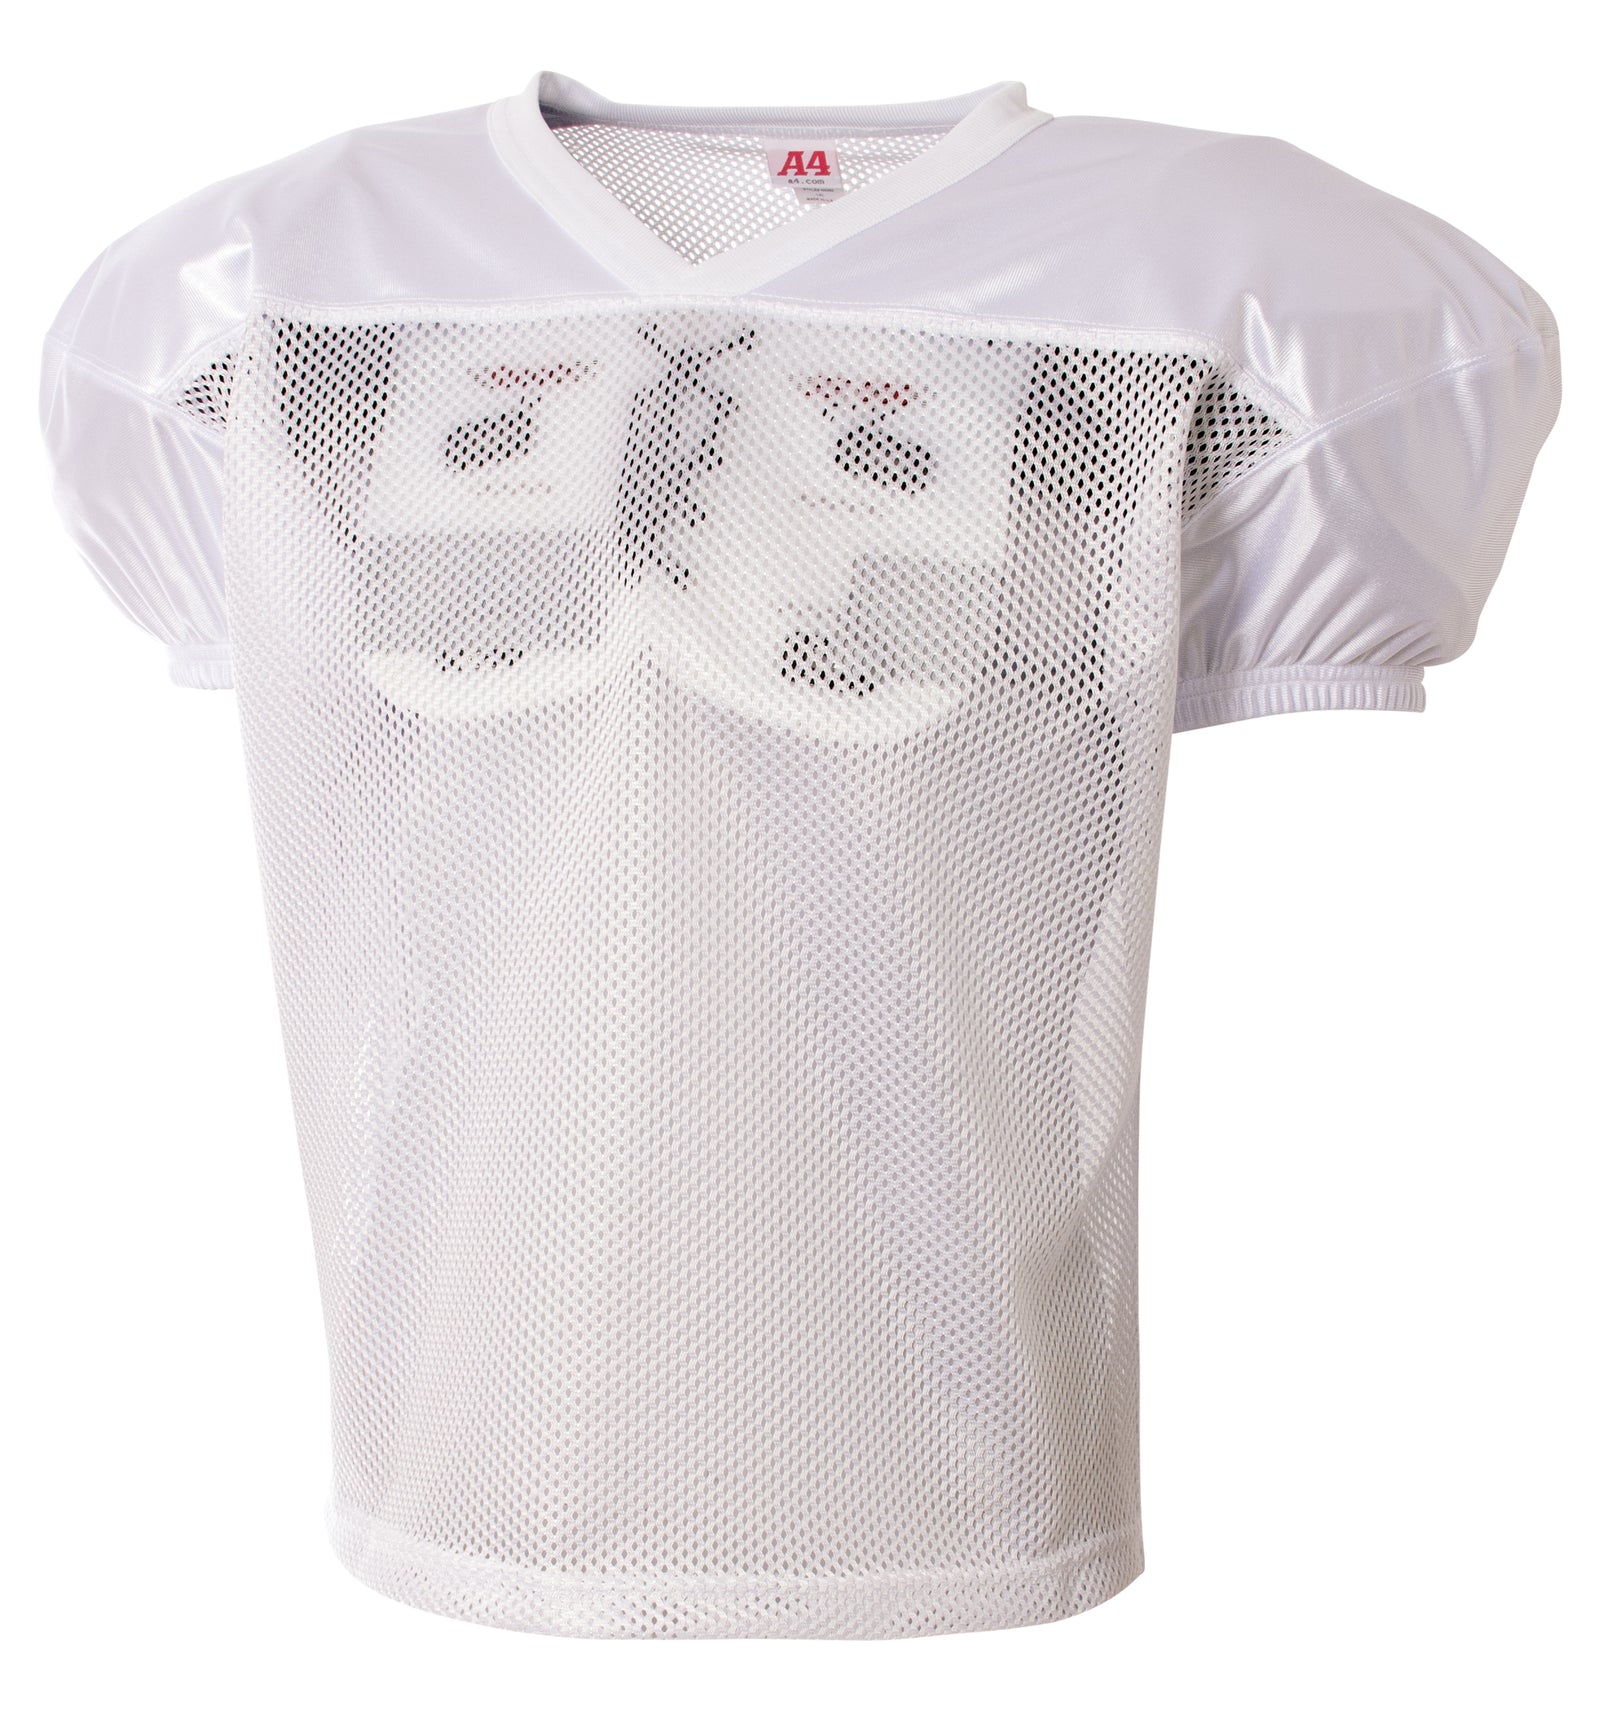 White A4 Drills Practice Jersey